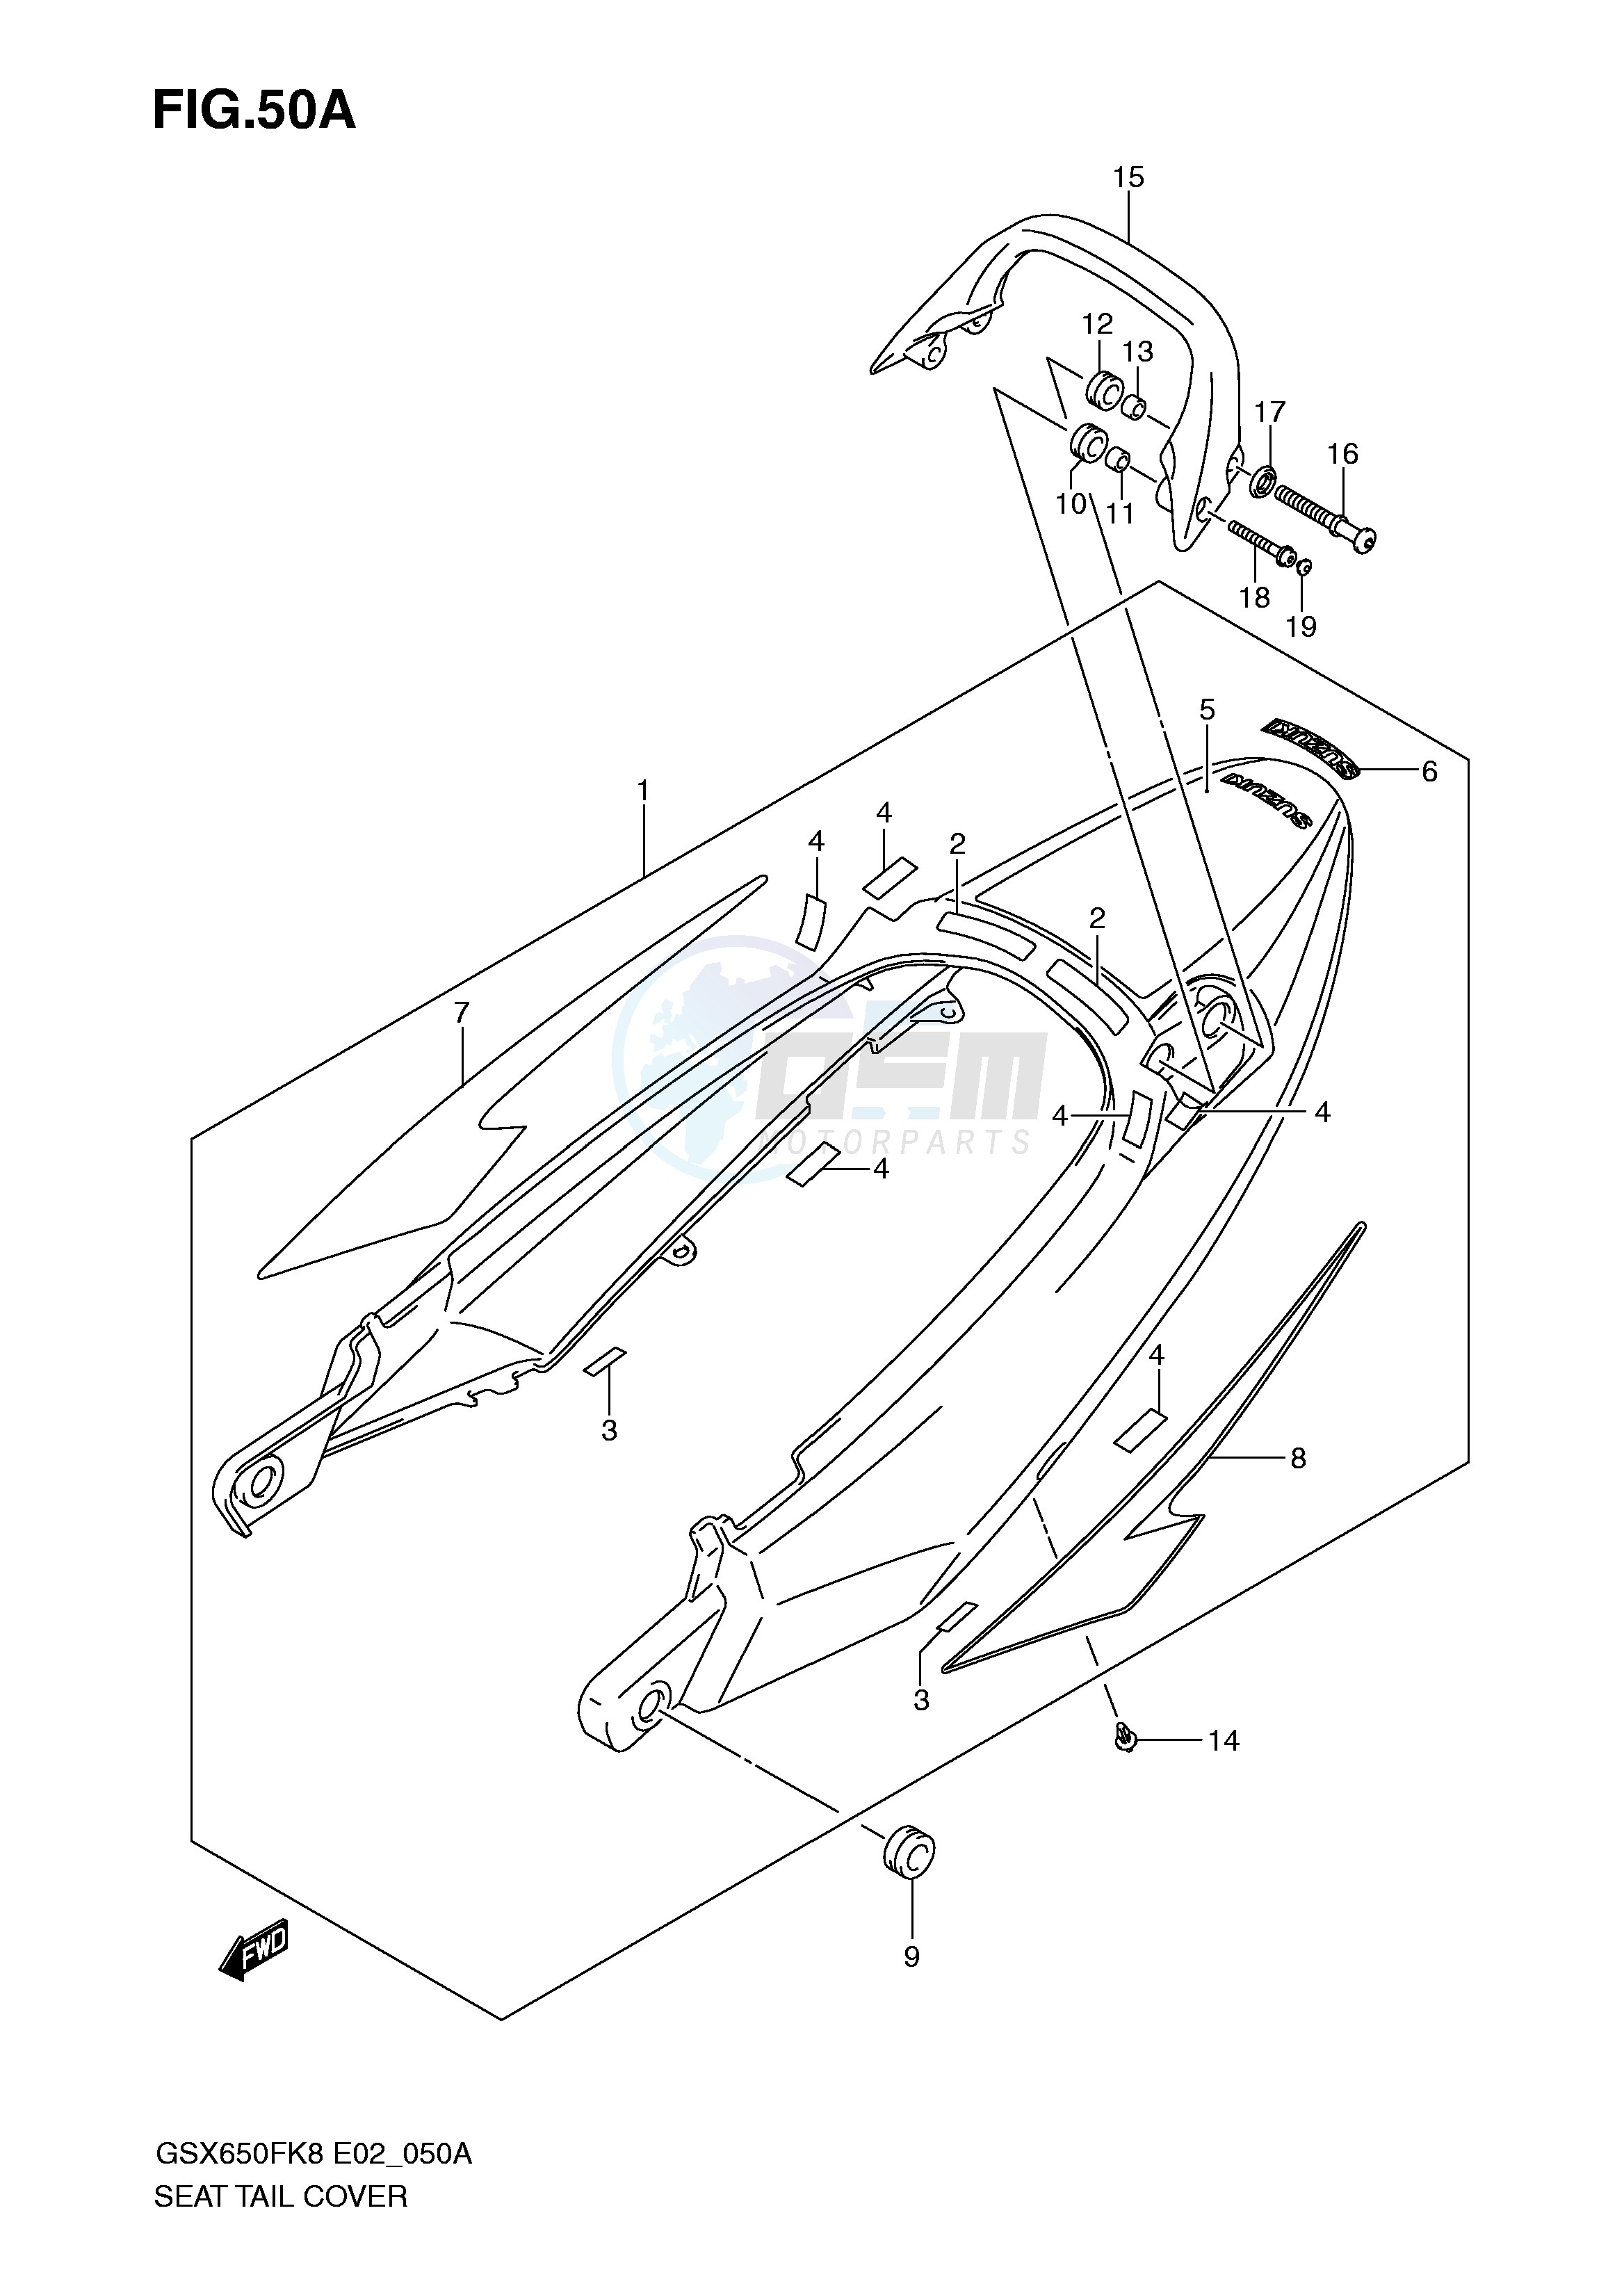 SEAT TAIL COVER (MODEL K9) blueprint